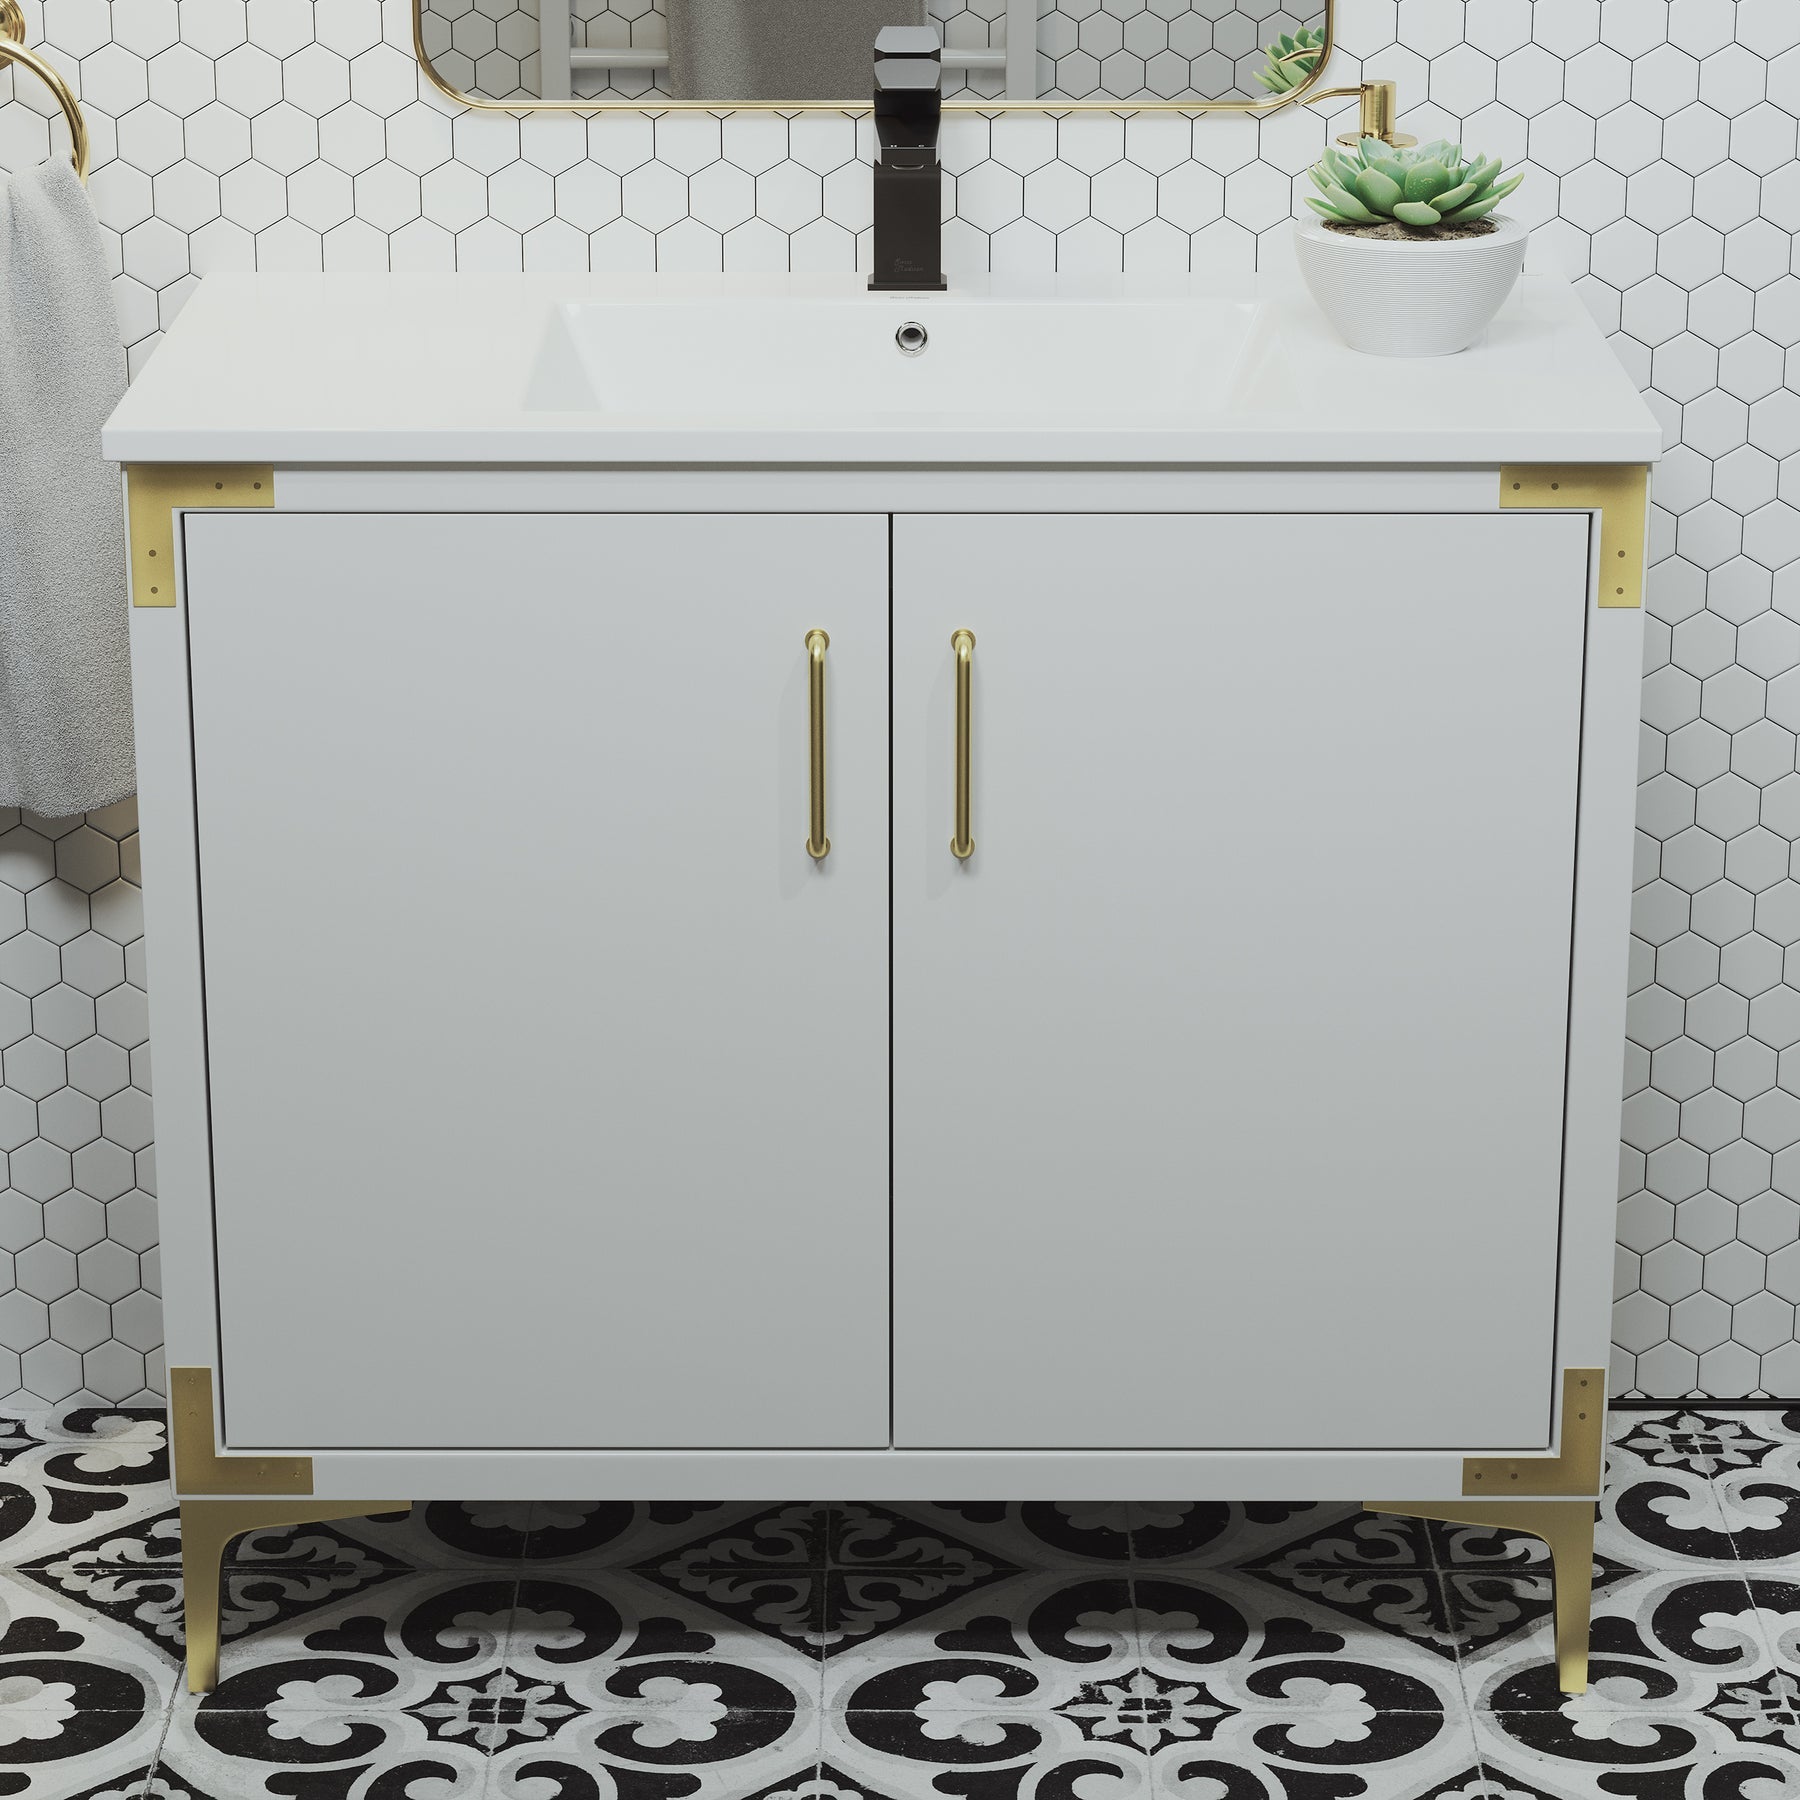 Swiss Madison Voltaire 36" Single, Bathroom Vanity in White with Gold Hardware - SM-BV320